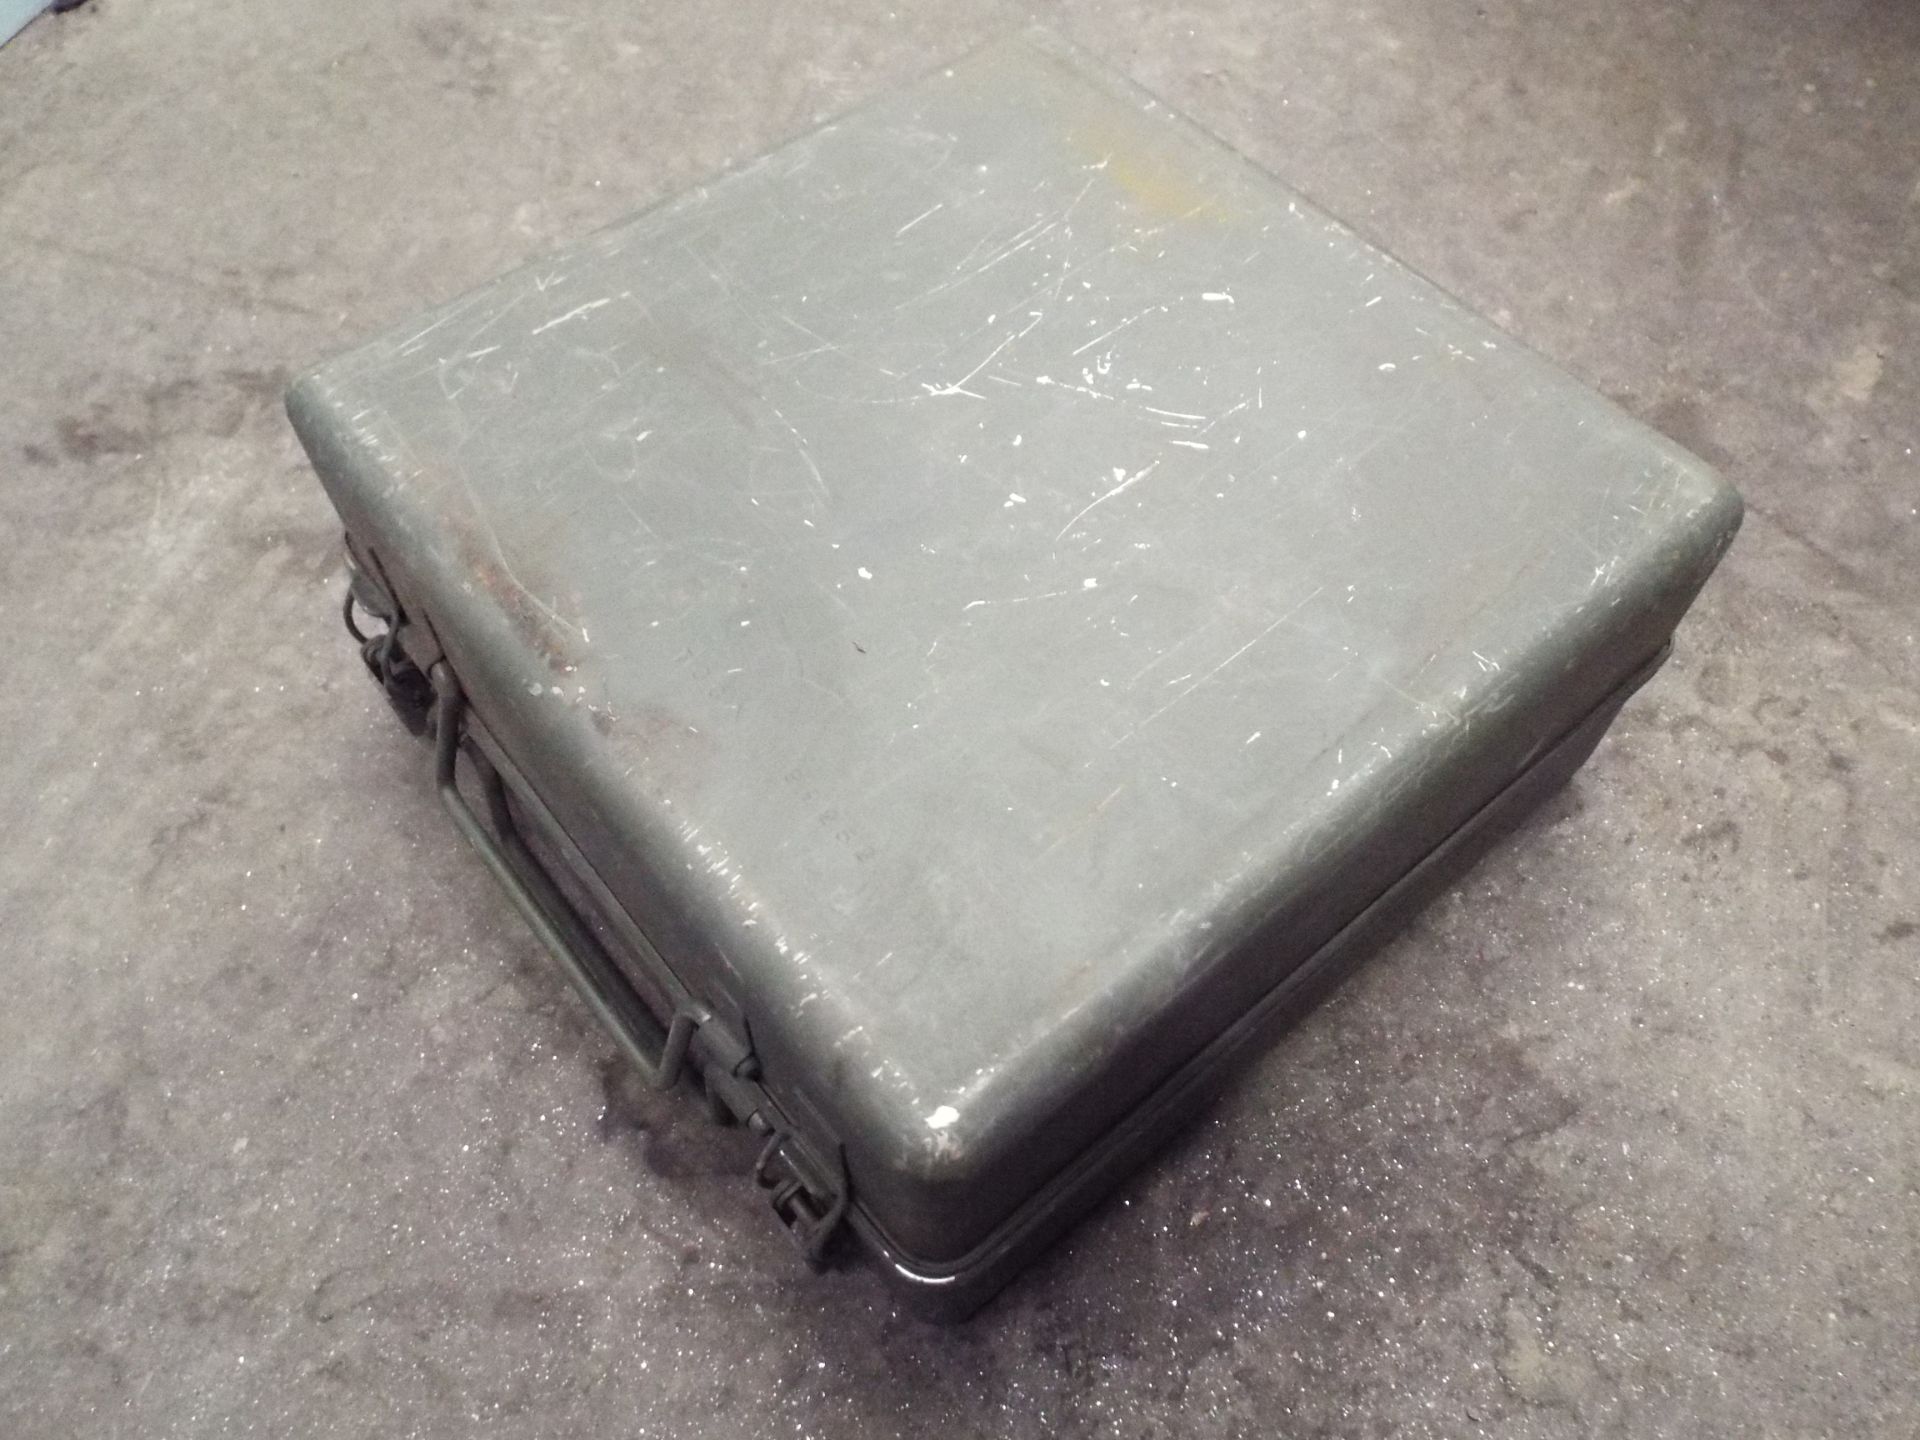 No. 12 Stove, Diesel Cooker/Camping Stove - Image 6 of 6